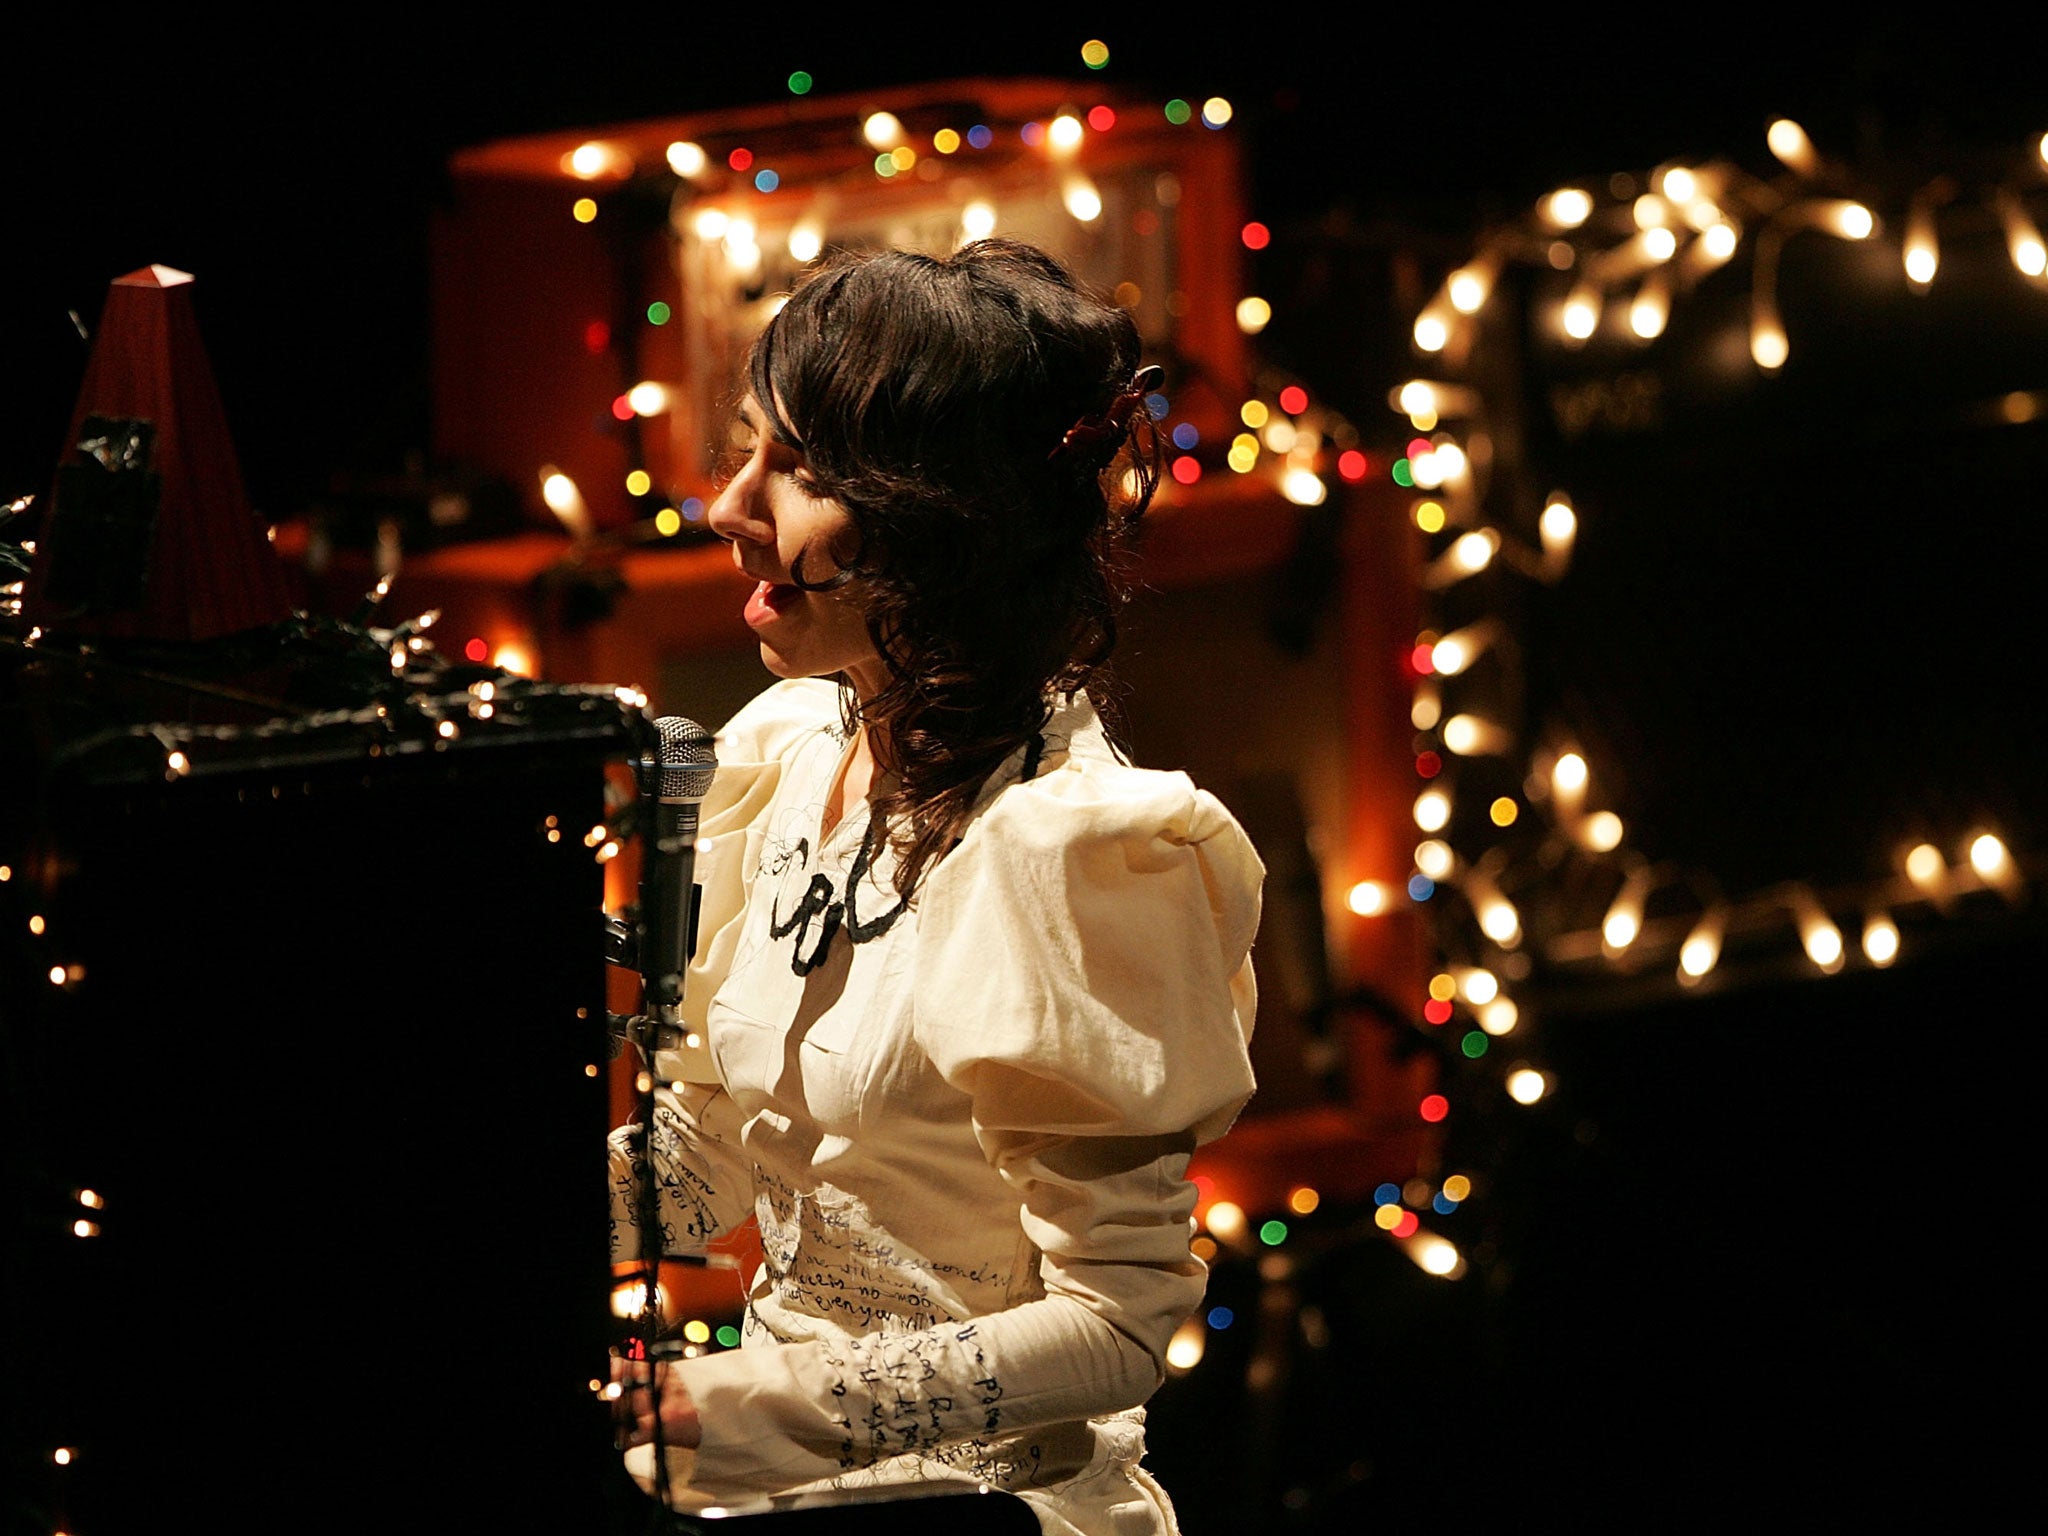 The true face of England and Englishness? PJ Harvey performs in Auckland, New Zealand in 2013